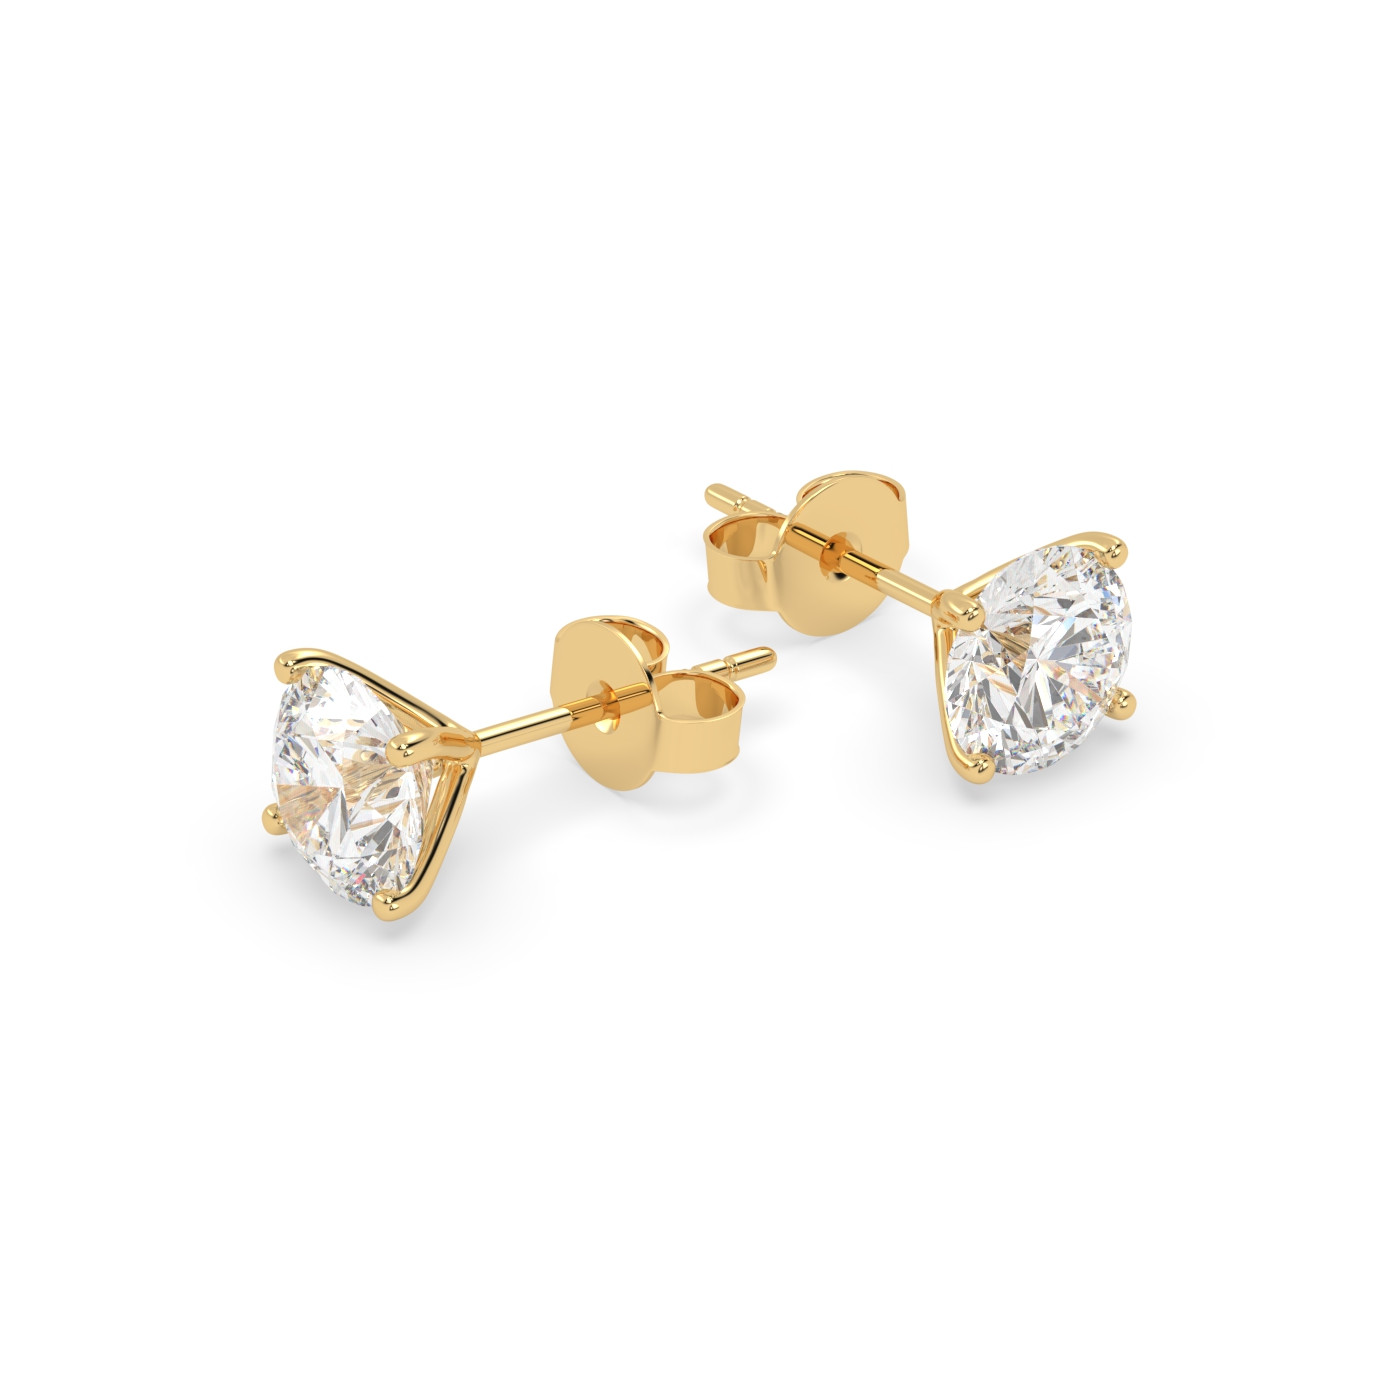 18k yellow gold  1.4 carat round stud earrings with butterfly back